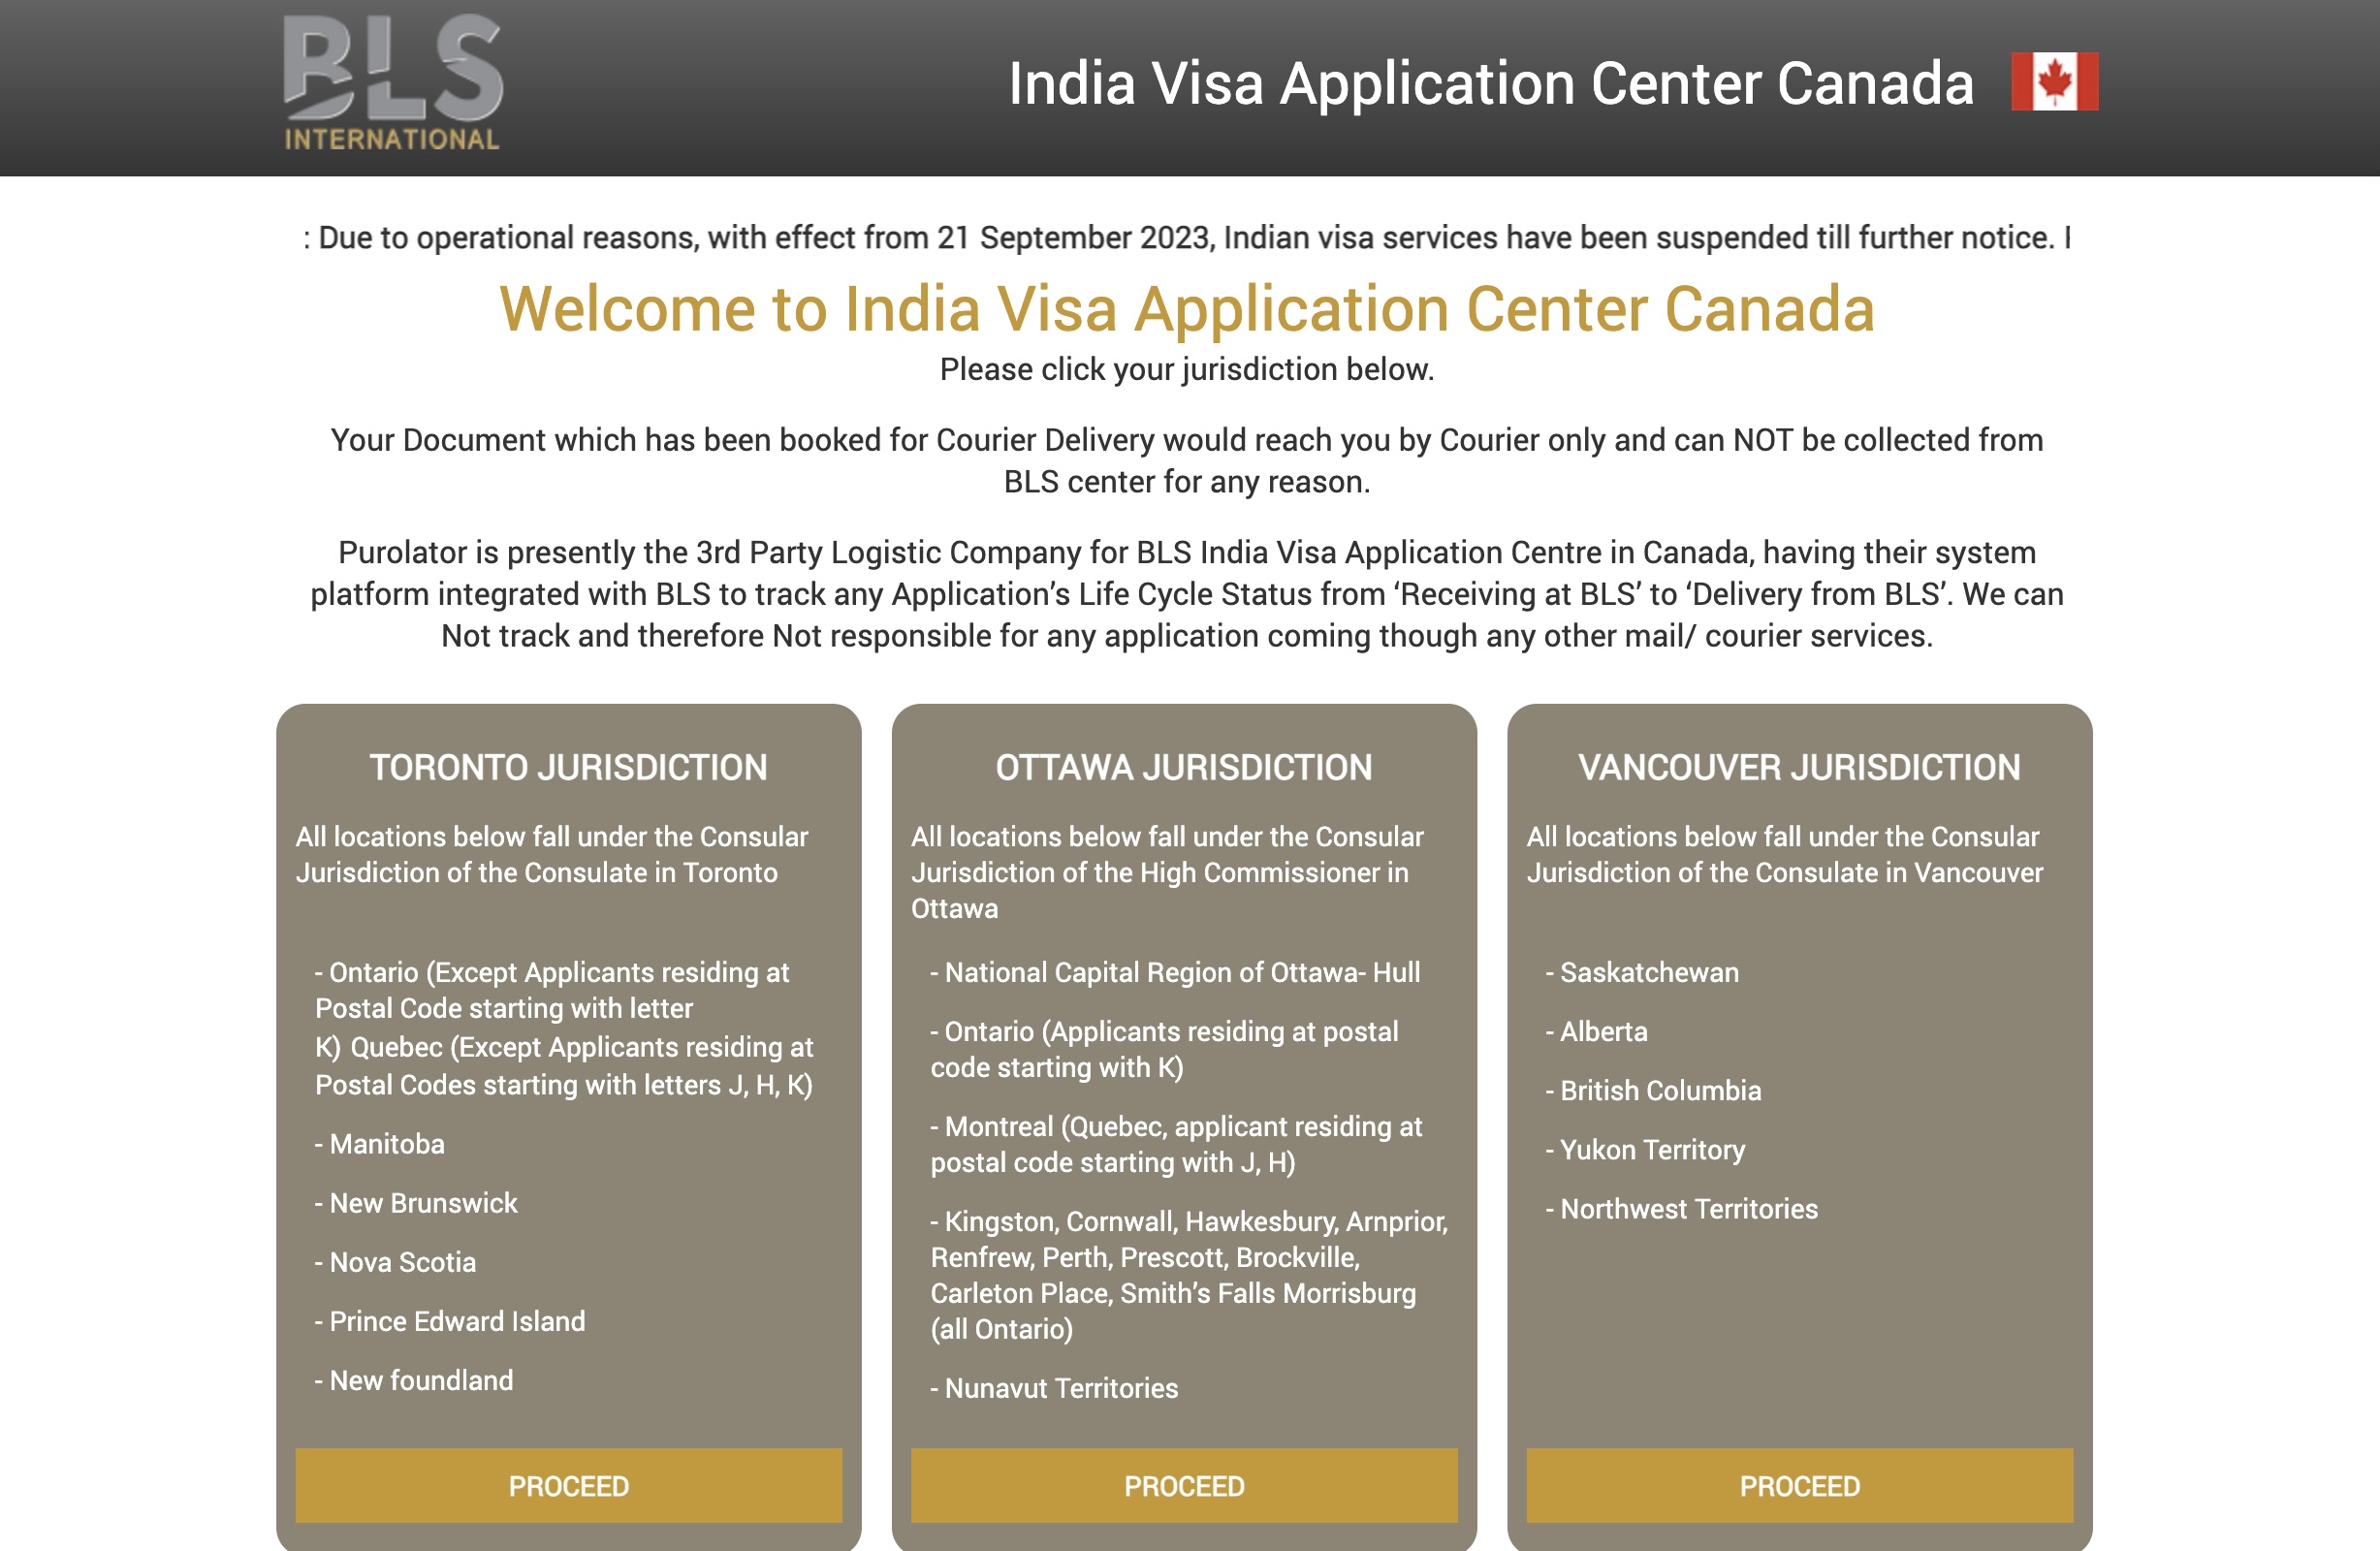 A screenshot of BLS international announcing India's suspension of visas for Canadians